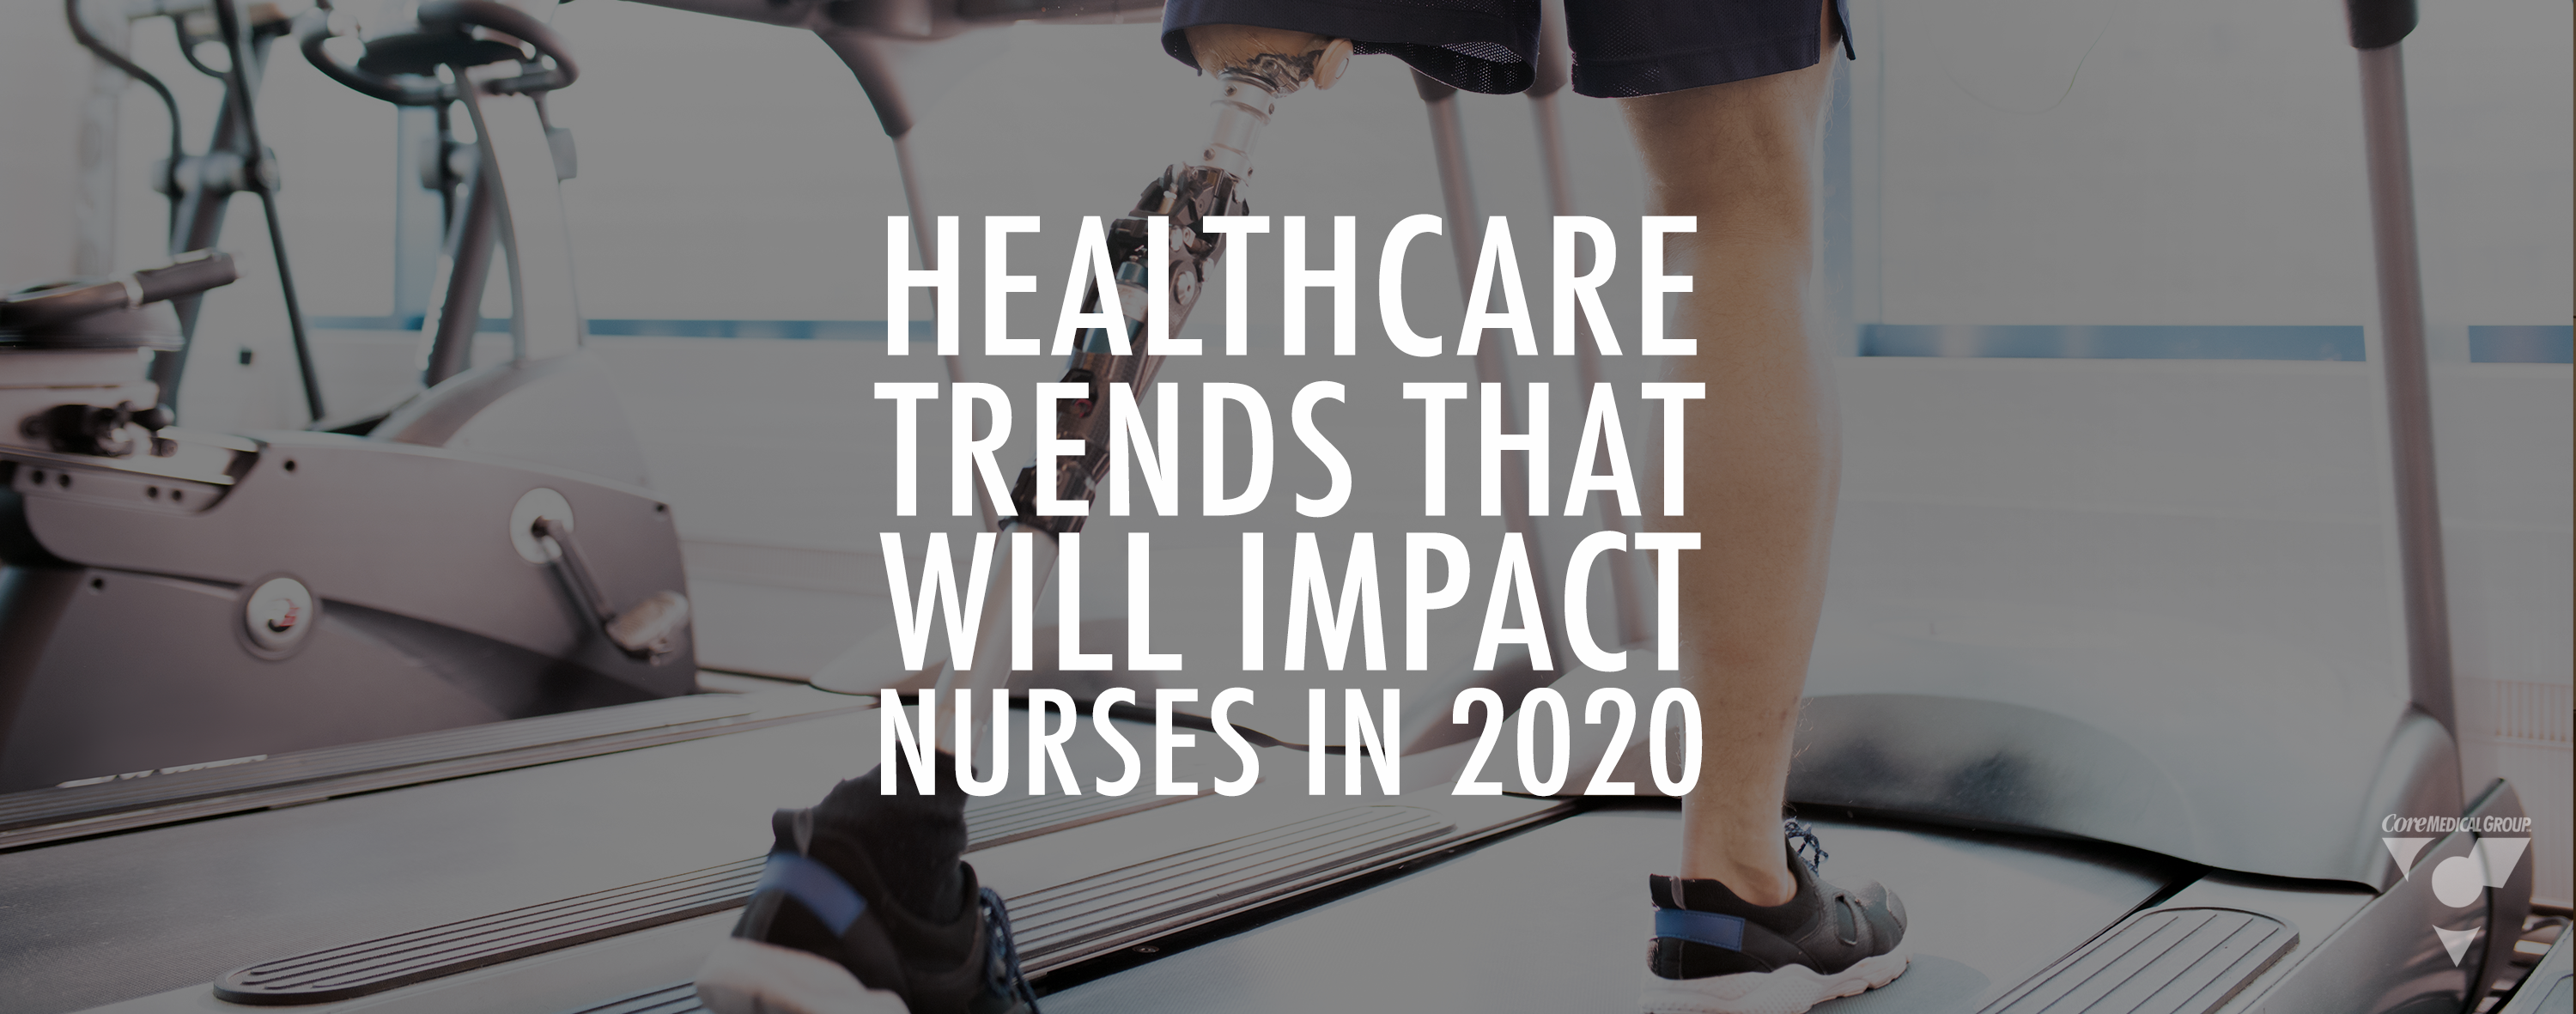 Healthcare Tends that will Impact Nurses in 2020